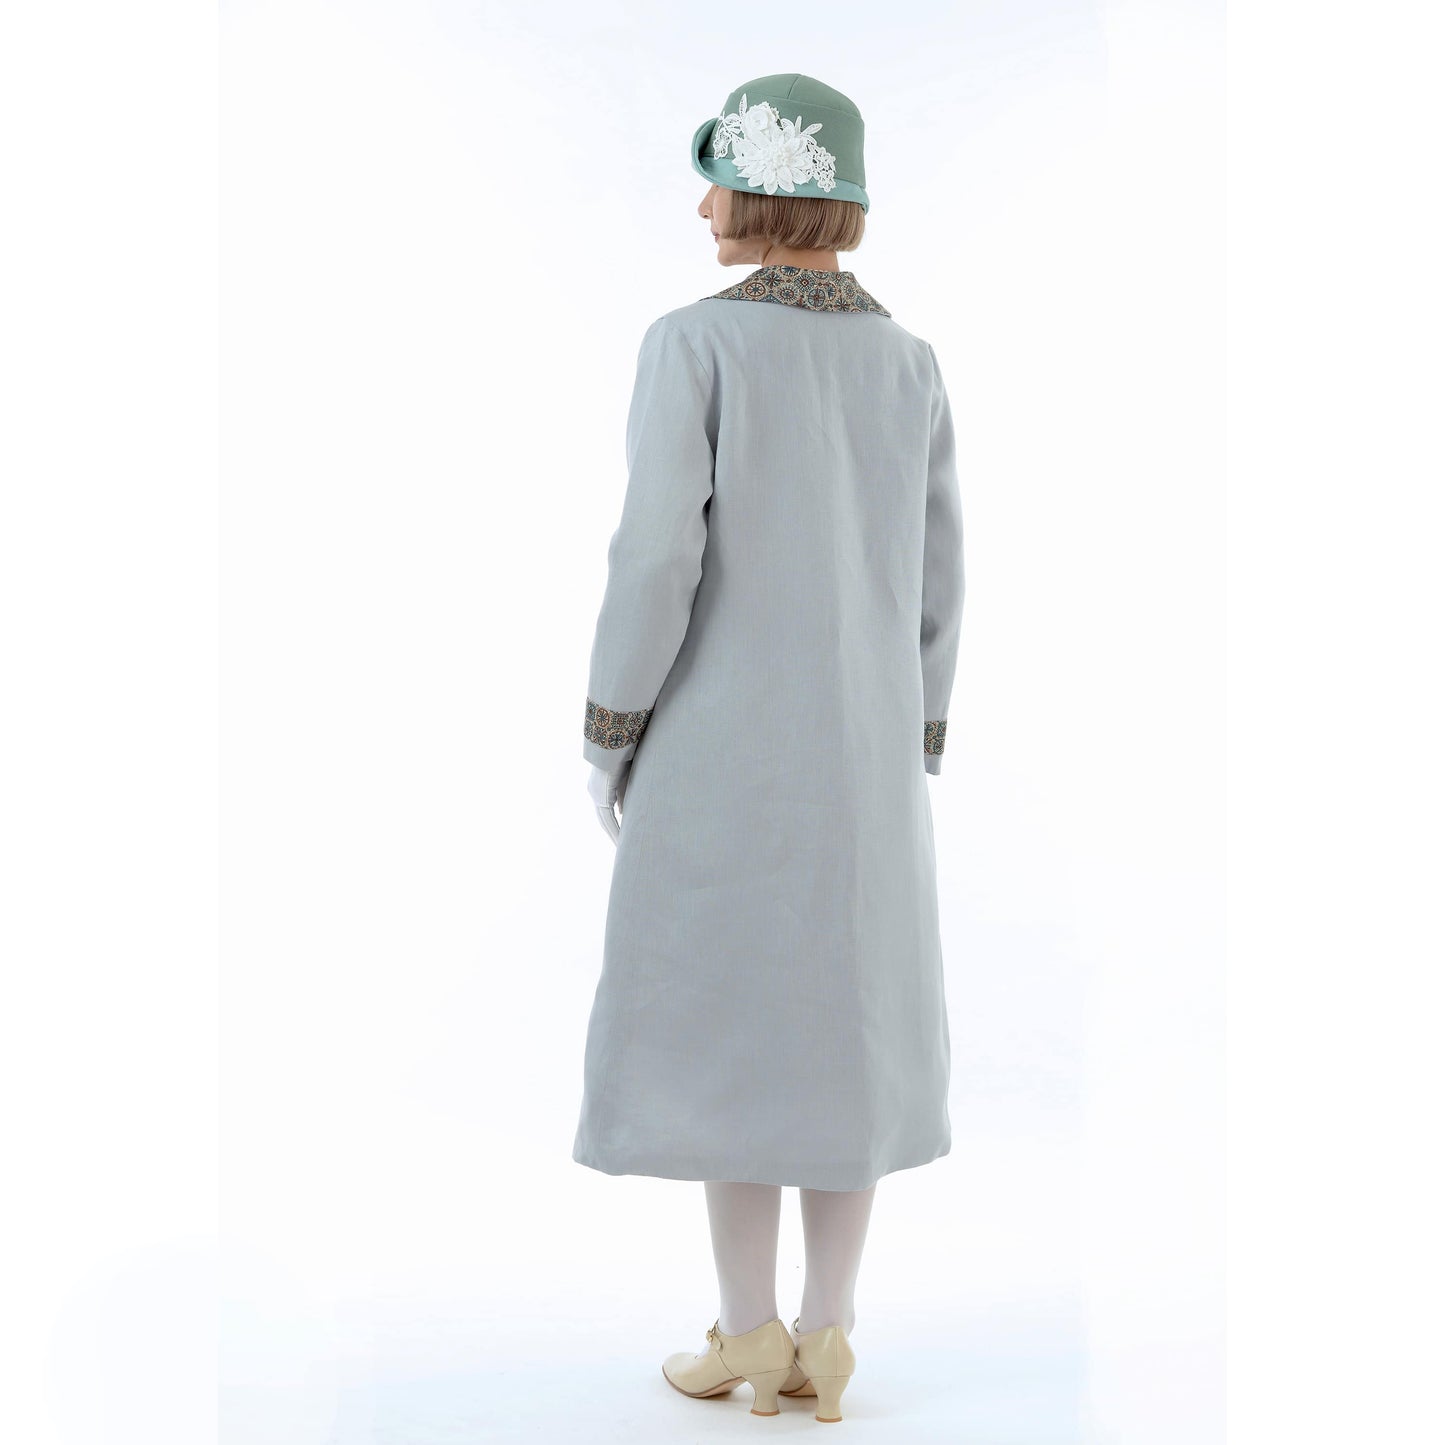 1920s-inspired linen day coat in grey with button closure